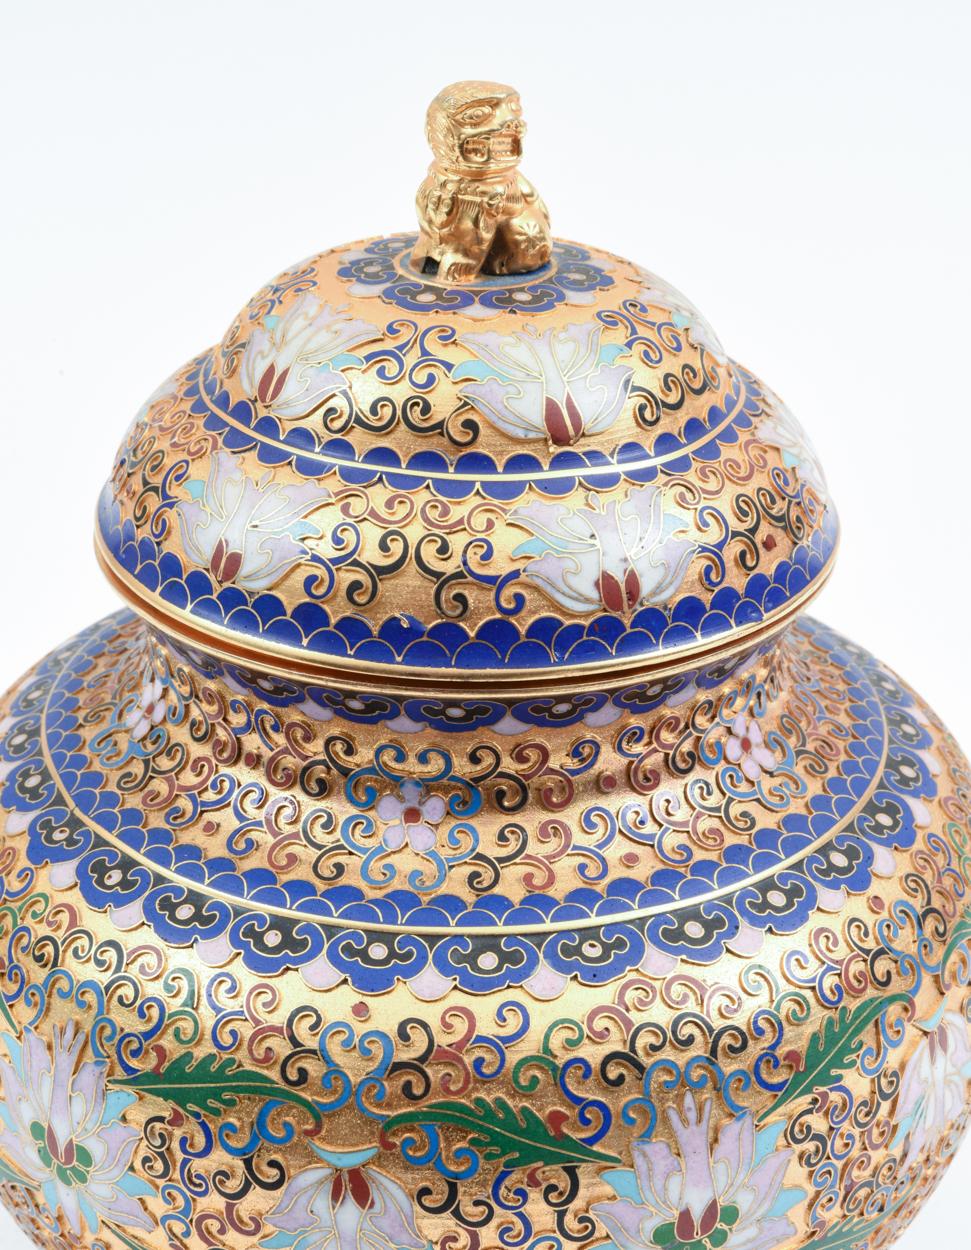 Mid-20th century gilded design details covered decorative urn / piece. The piece is in excellent vintage condition. The covered urn measure about 10 inches high X 9 inches diameter.